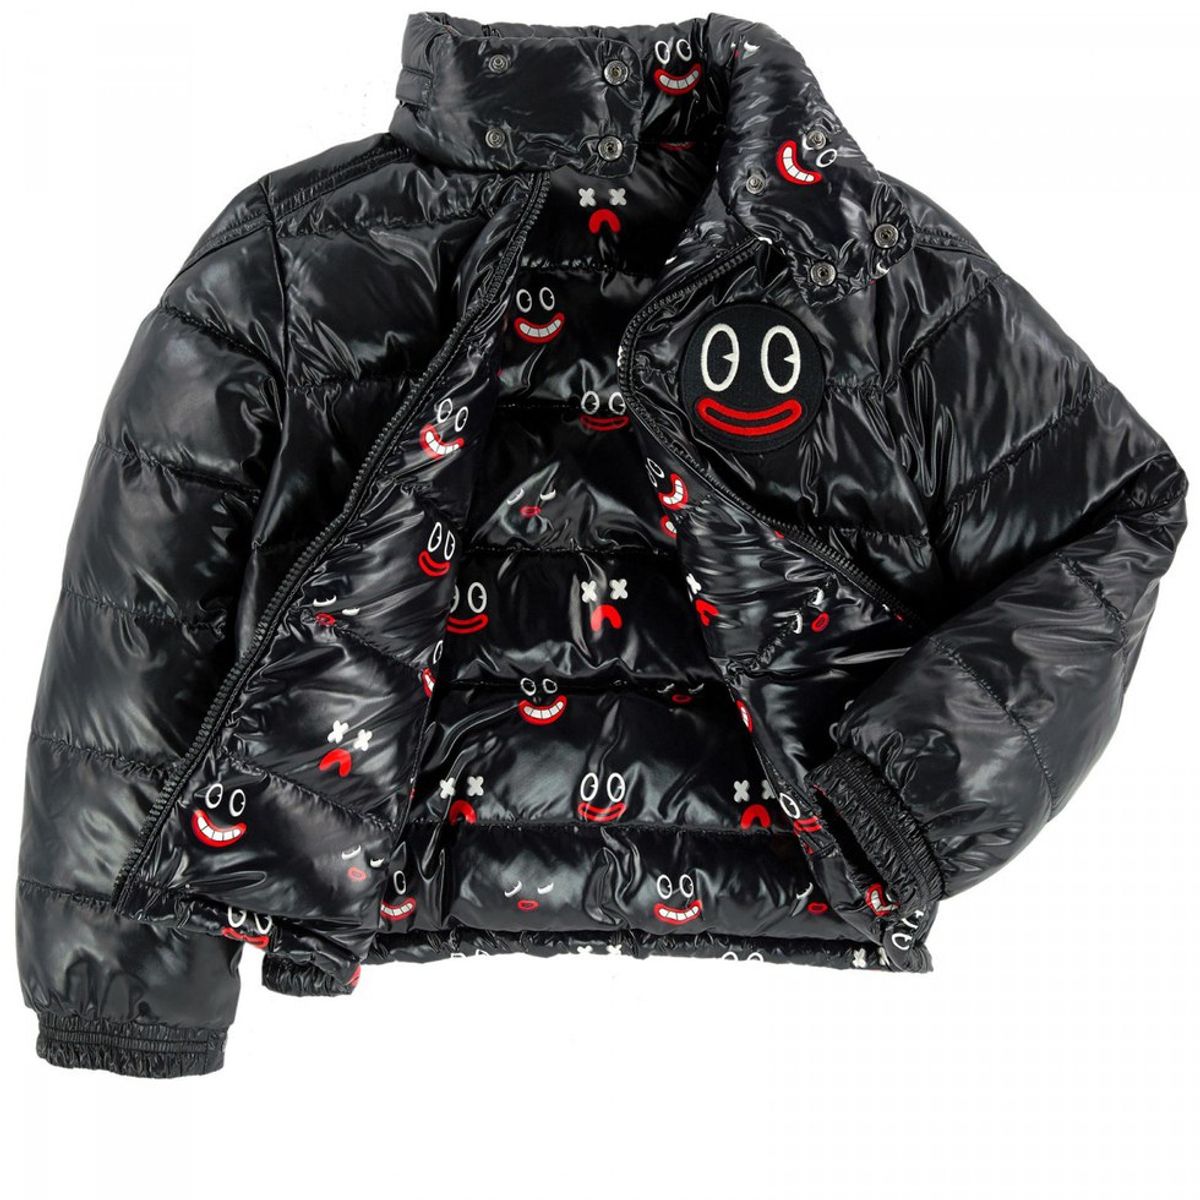 An Open Letter to Moncler